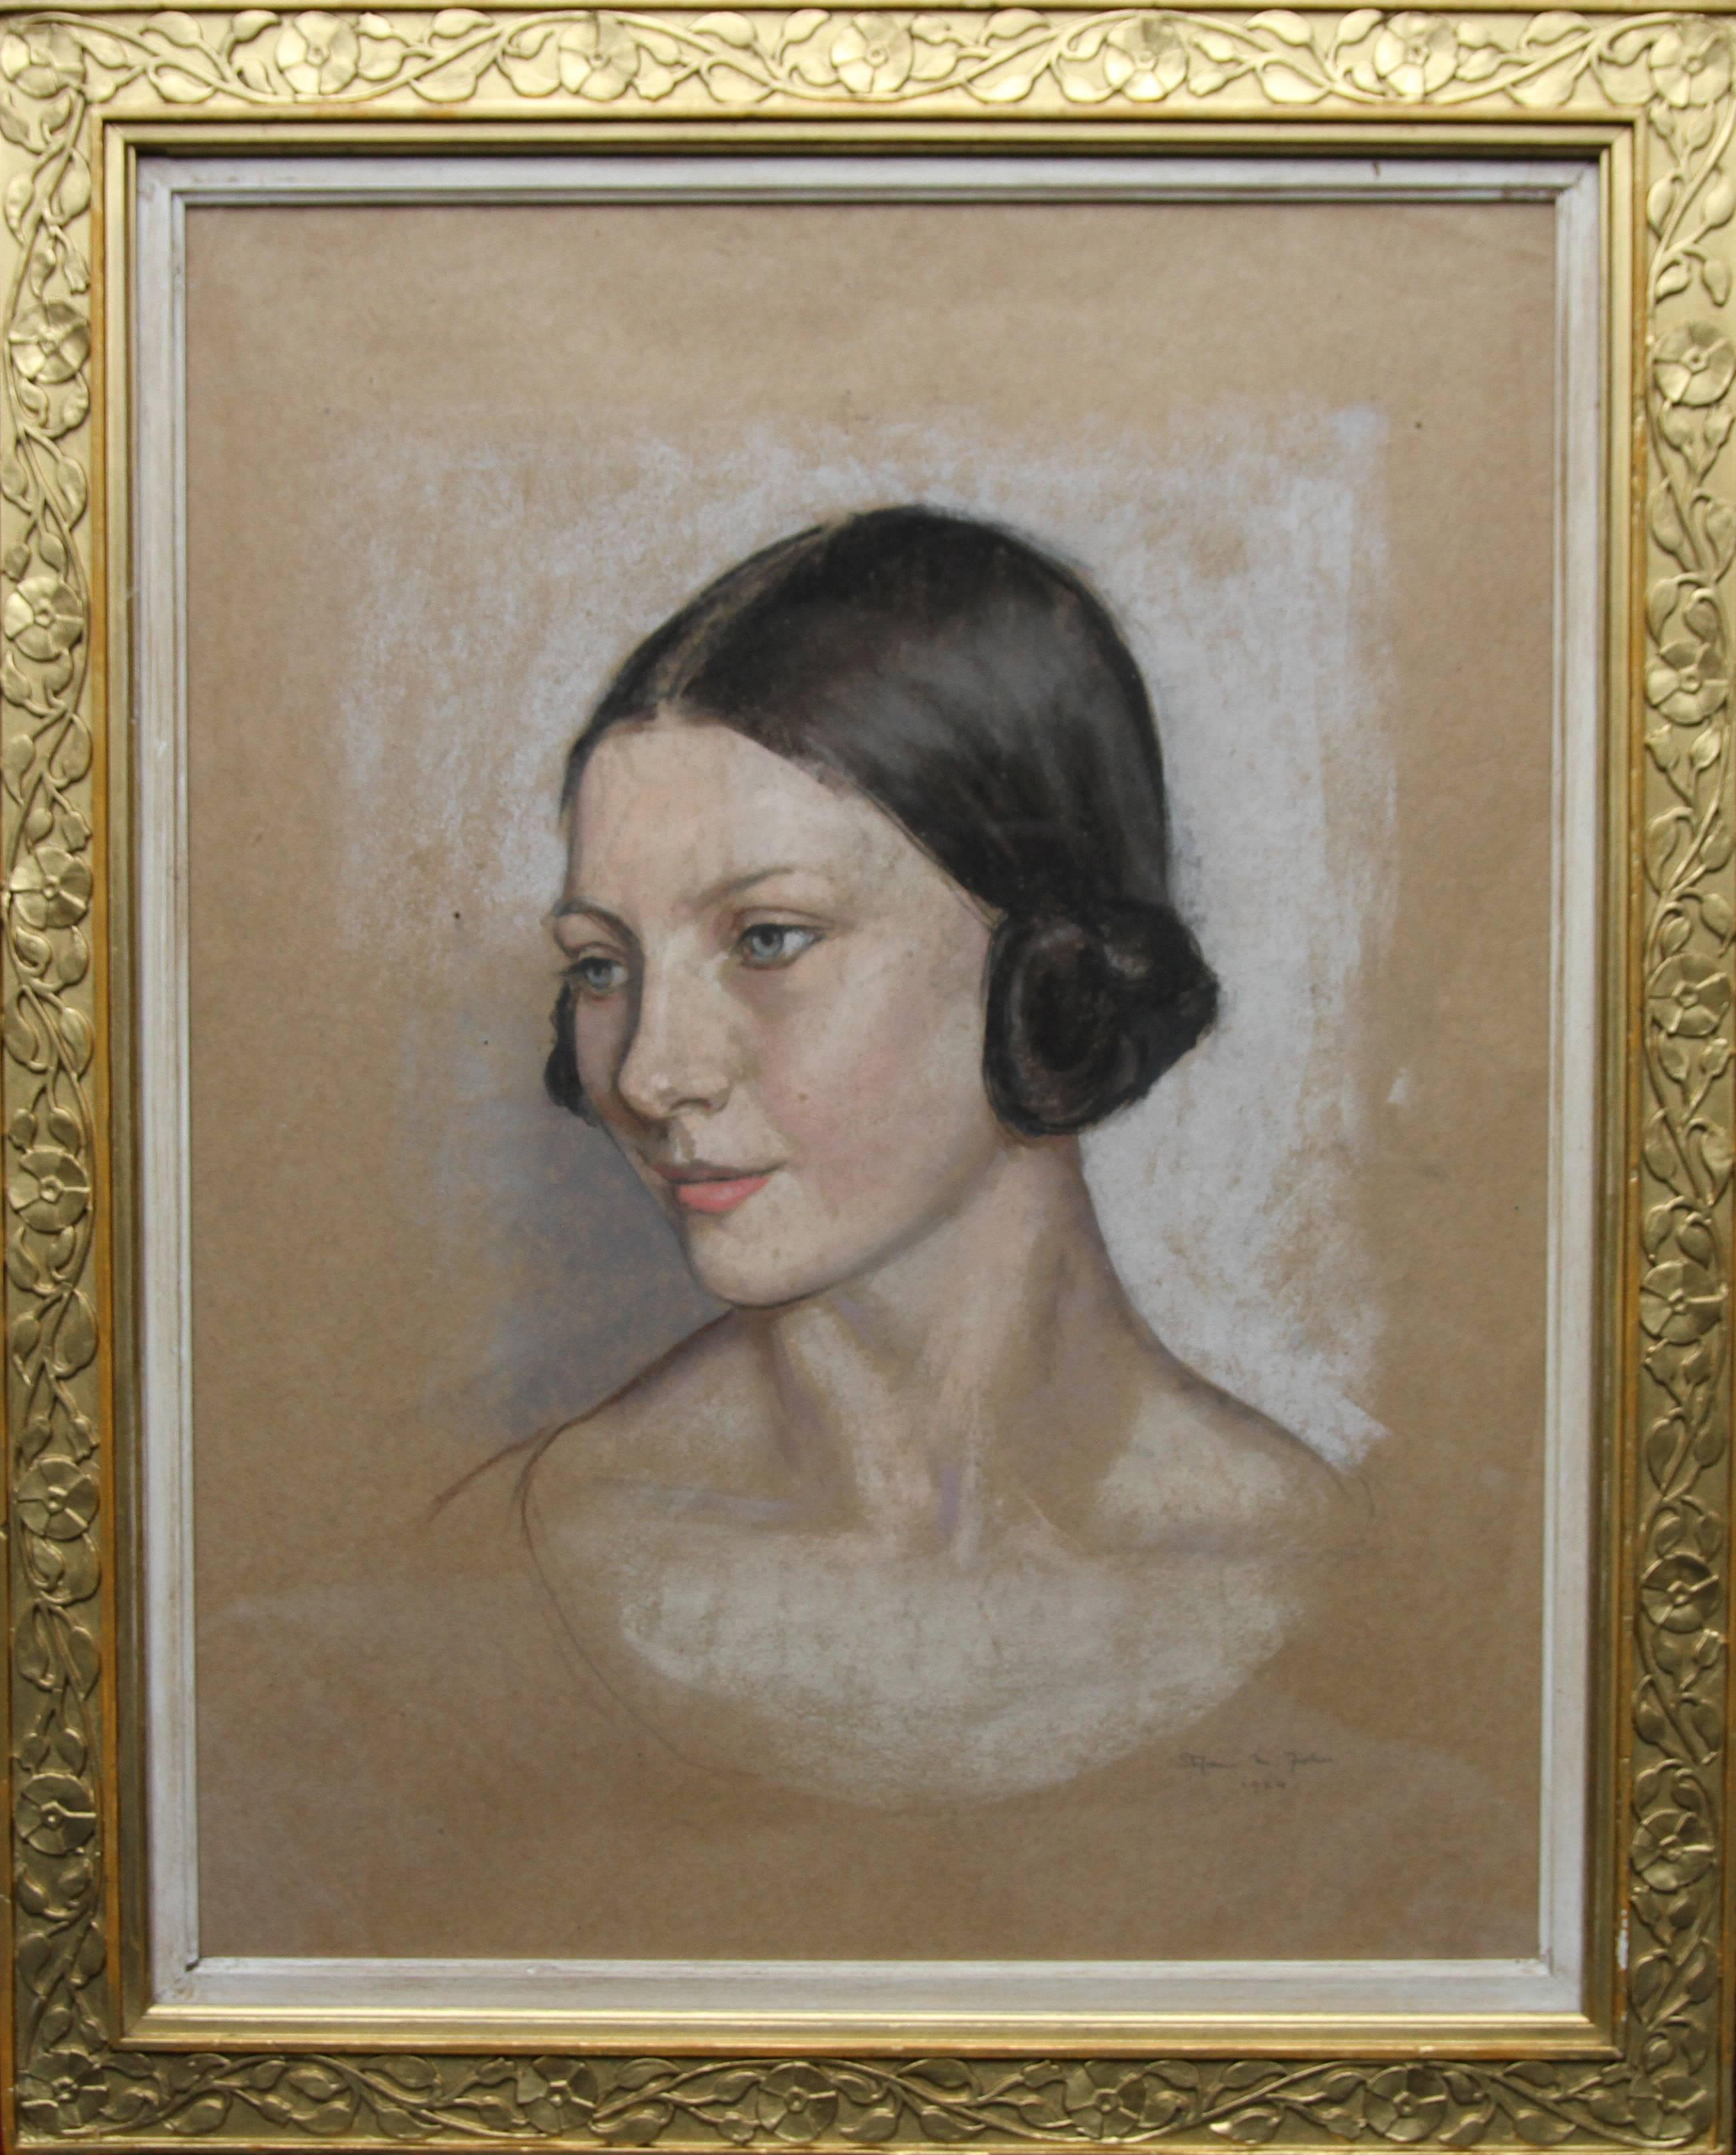 A really lovely early 20th century British watercolour and chalks portrait on paper by Stefani Melton Fisher. It depicts in a realistic palette a beautiful young woman and was painted in 1924. In excellent clean condition and quite stunning.
Signed